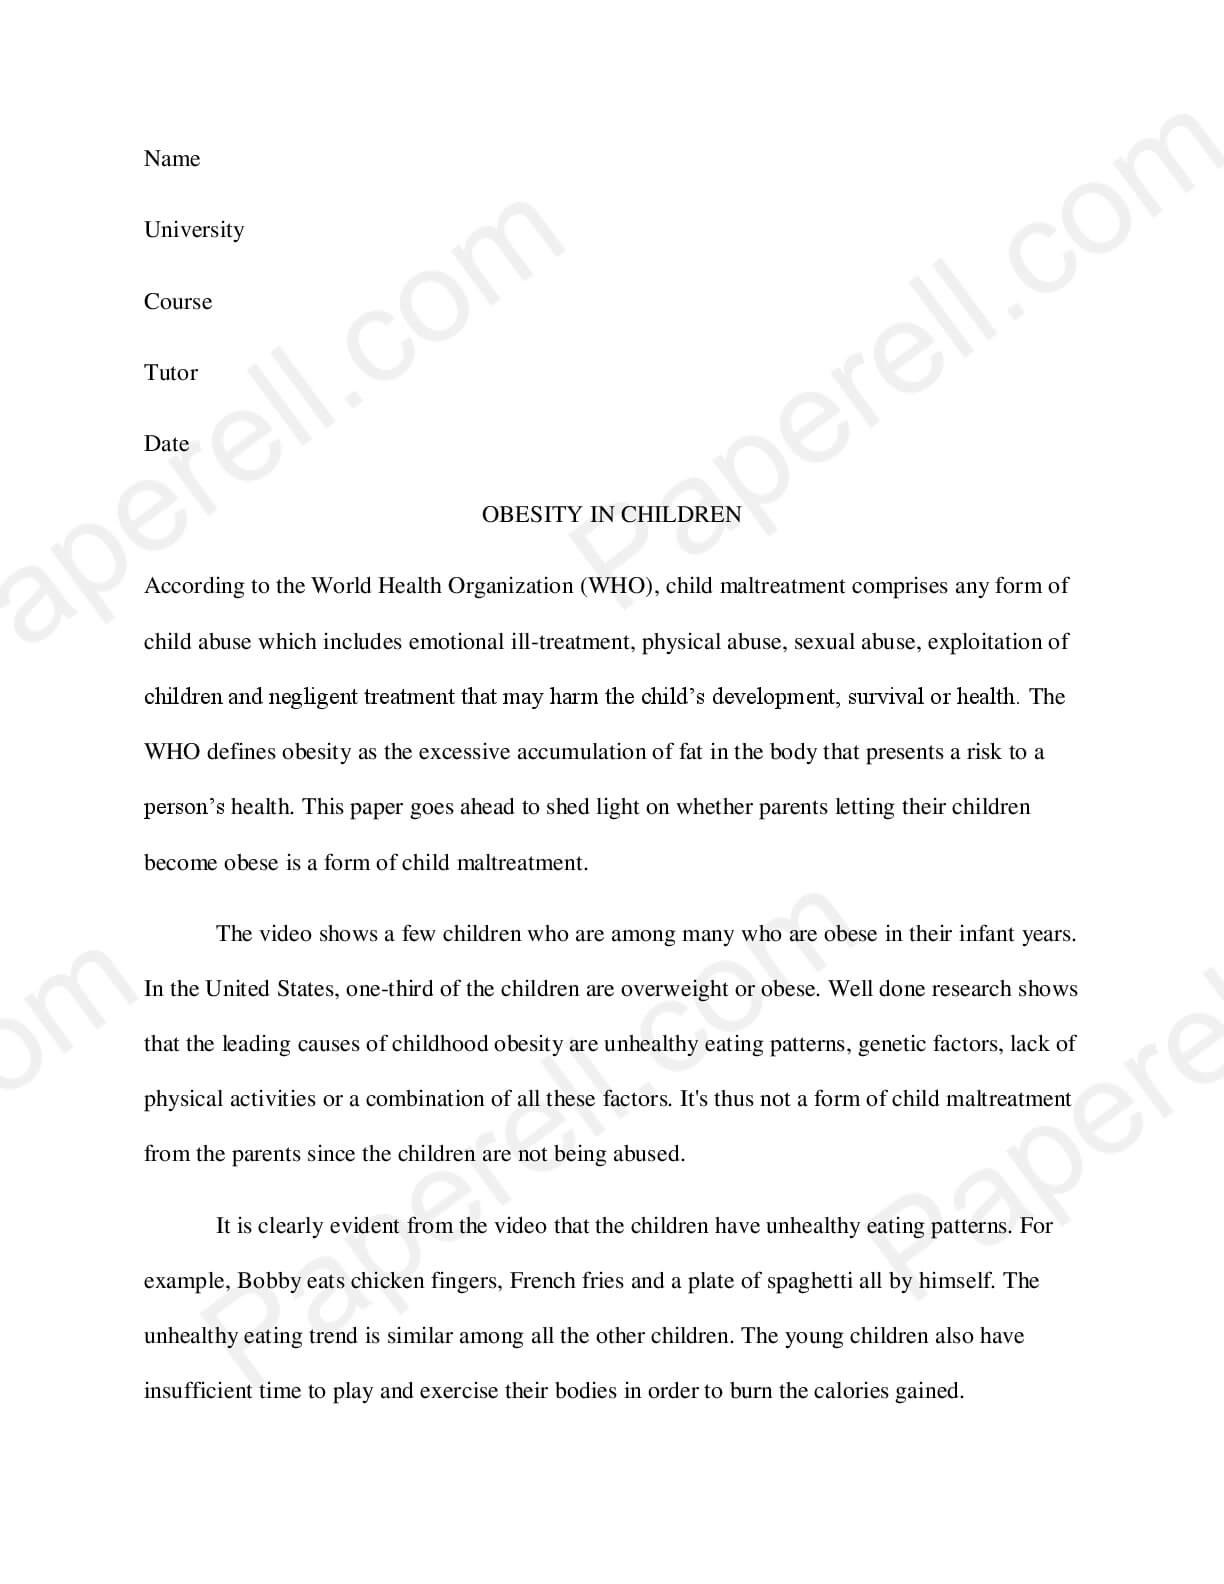 Buy Research Paper | Custom Research Papers